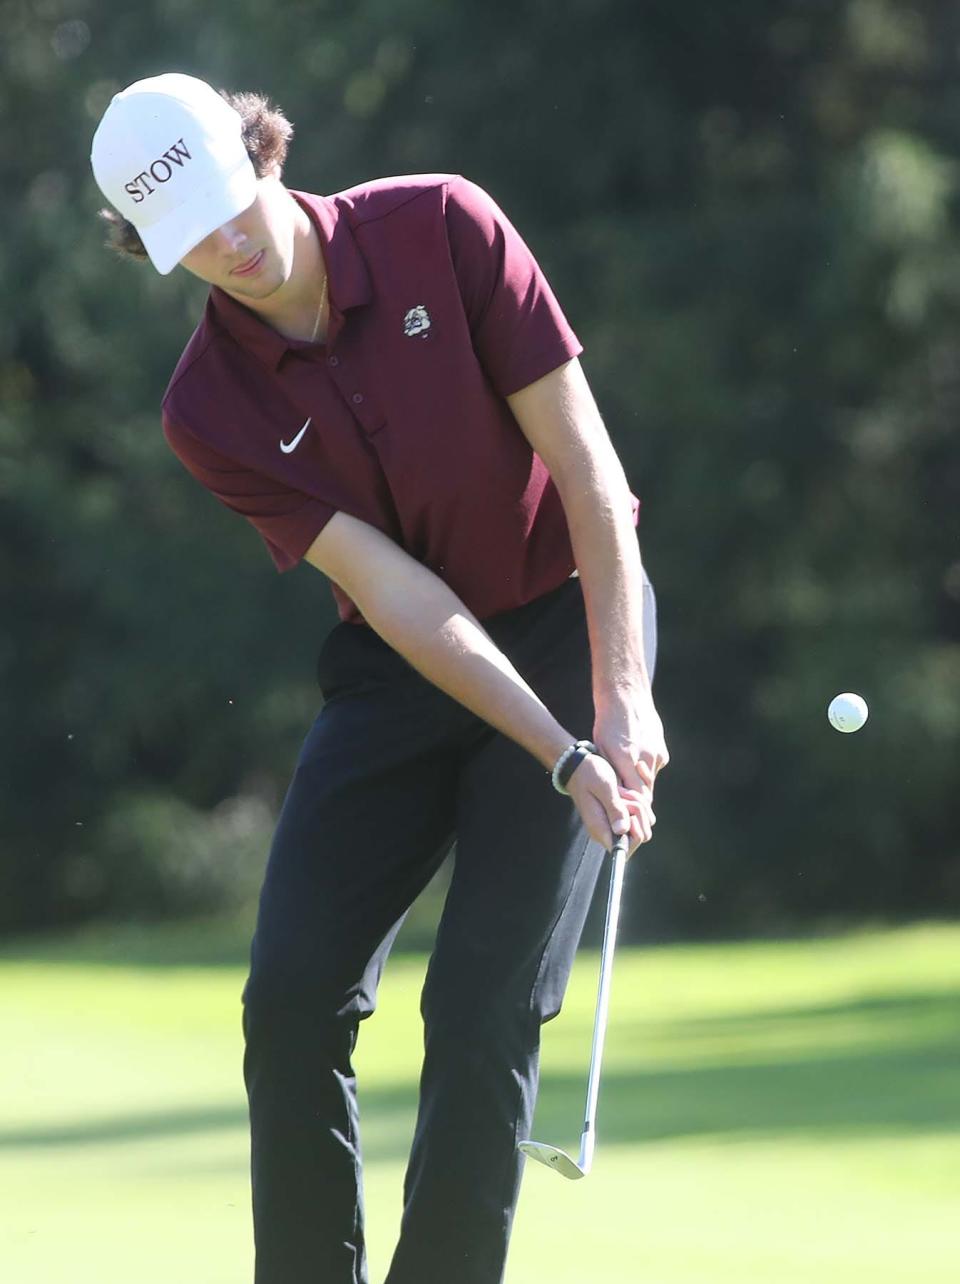 Ben Skripac of Stow chips onto the green during the Division I Boys District Golf Tournament at Pine Hills Golf Course in Hinckley on Monday. 